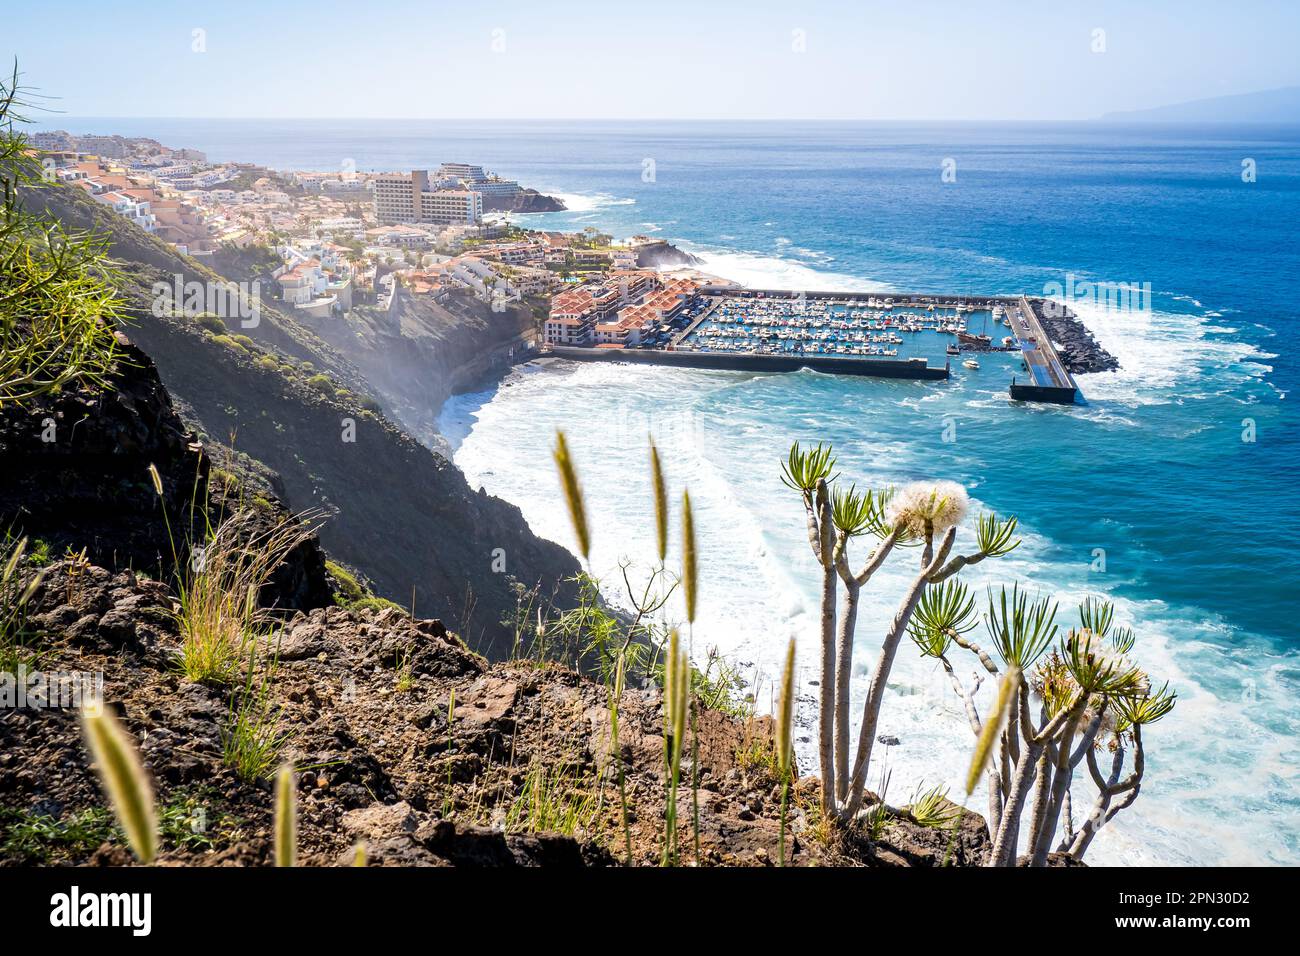 Panoramic view from a towering cliff showcases Los Gigantes village, Puerto de Los Gigantes harbor and Playa Los Guíos beach. Stock Photo